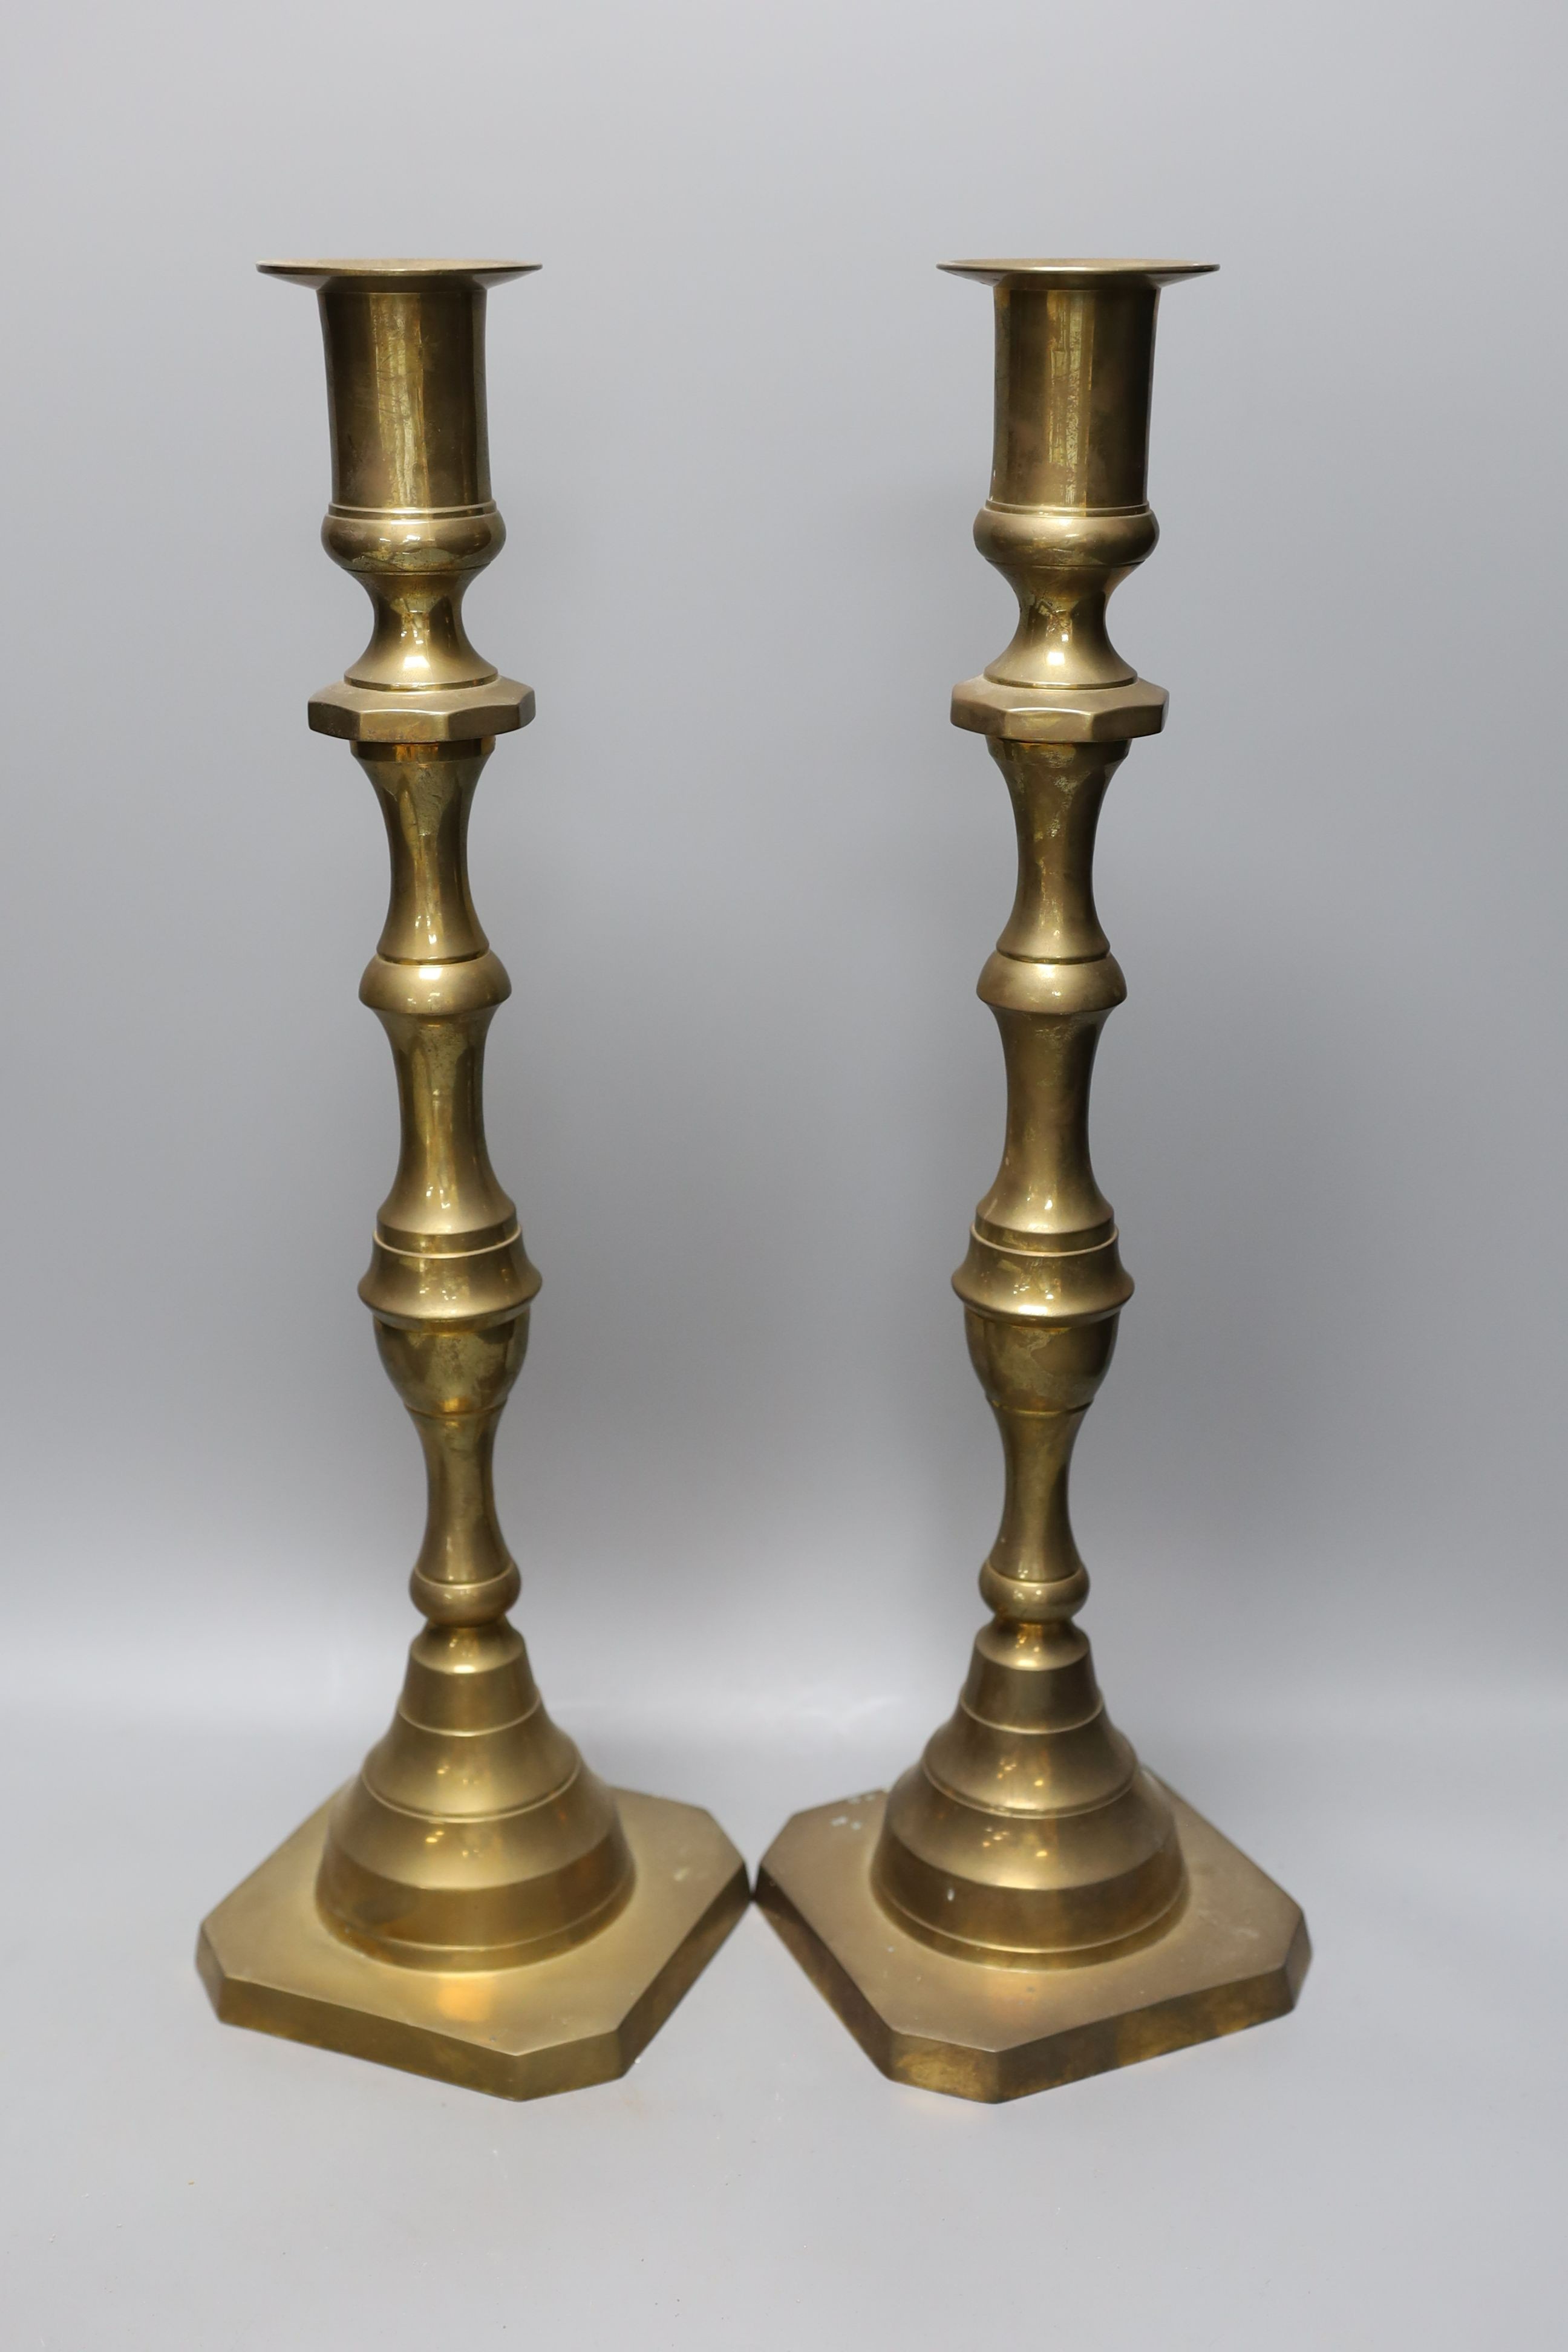 A Damascus jewellery casket and a pair of Victorian candlesticks, 43cm tall